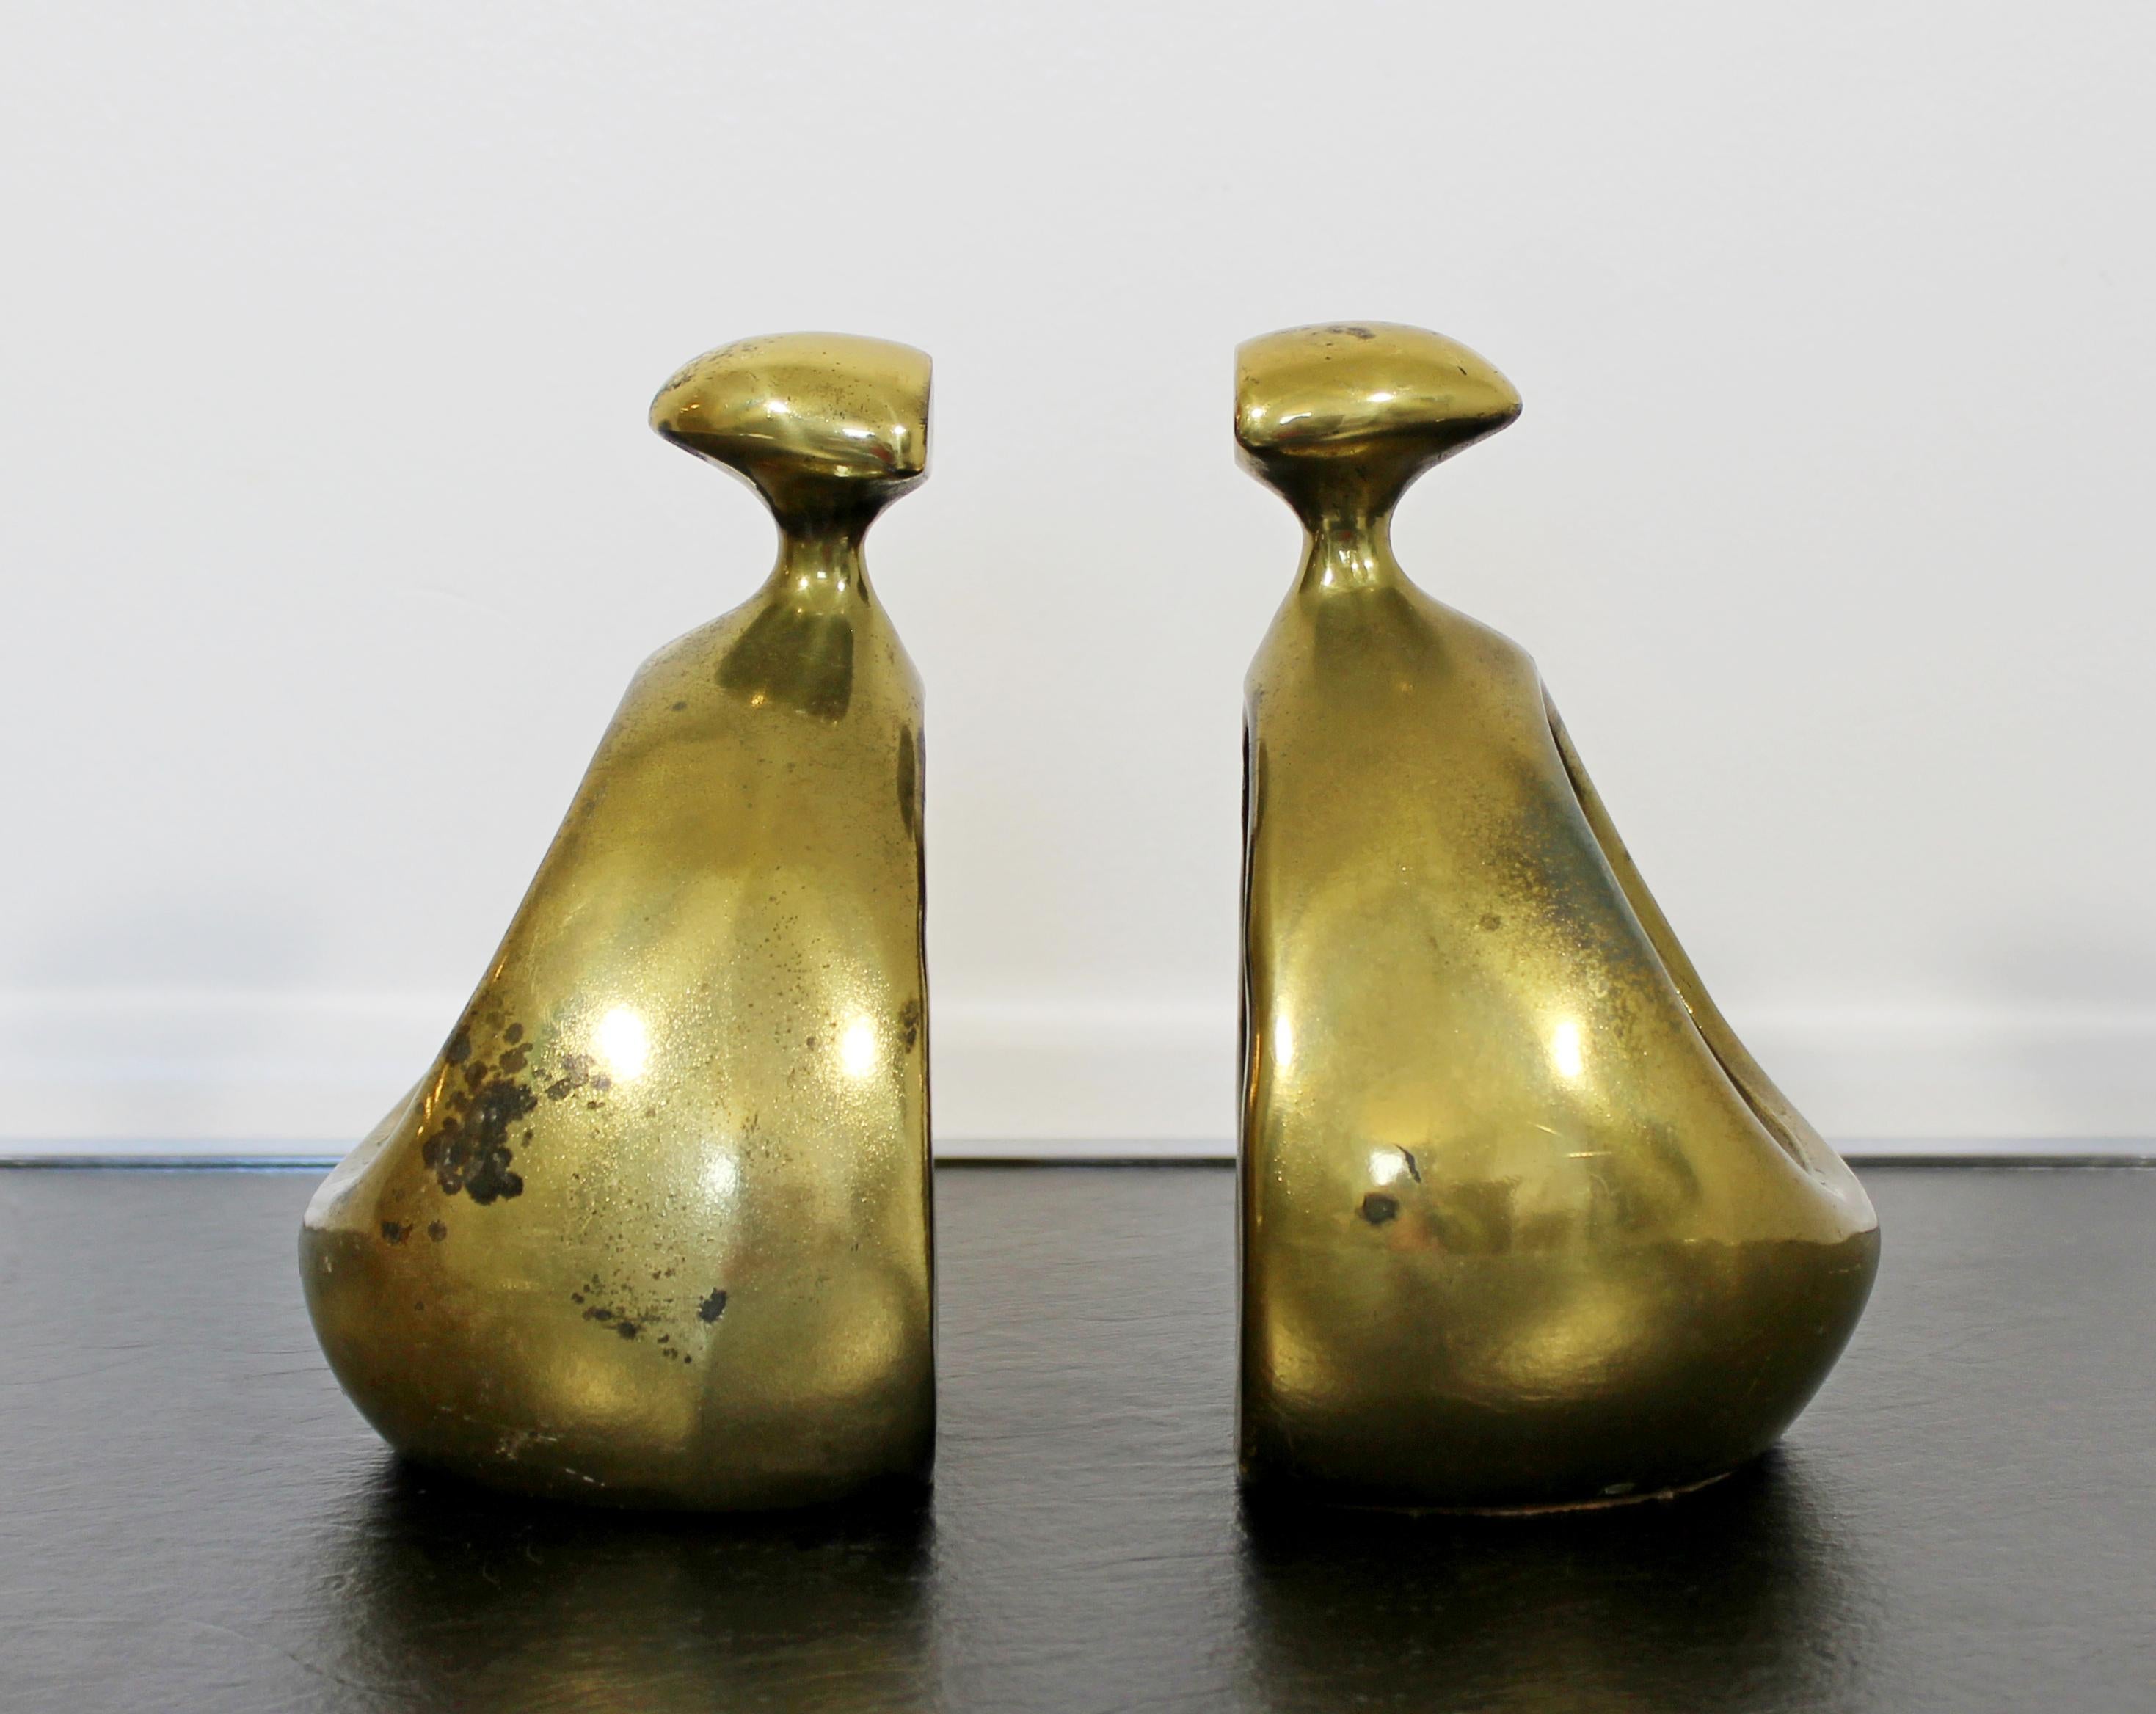 For your consideration is a wonderful pair of bookends, made brass, by Ben Siebel, circa the 1950s. In good vintage condition, with a patina to match the age. The dimensions of each are 5